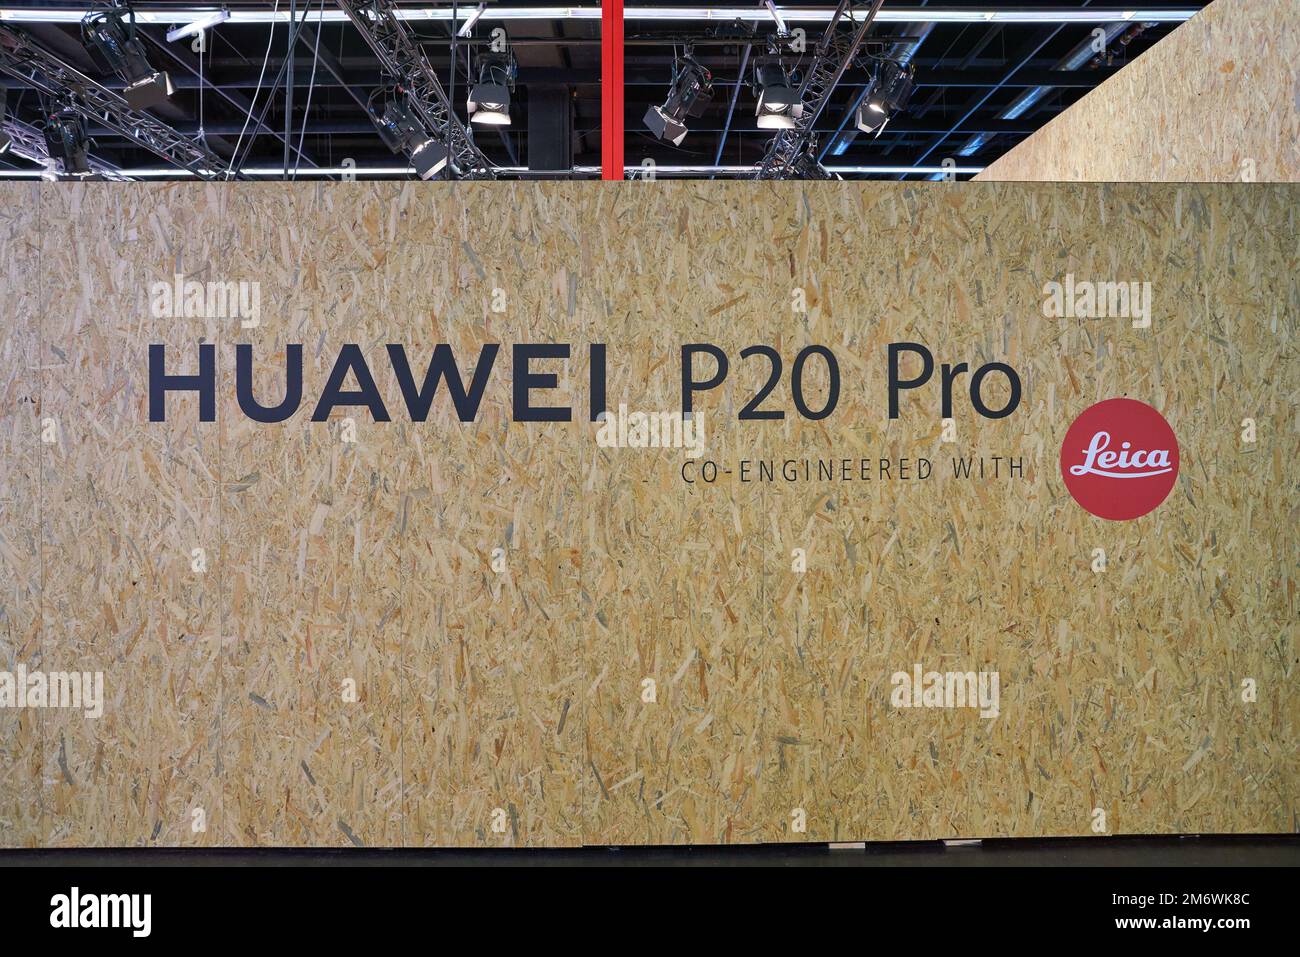 COLOGNE, GERMANY - CIRCA SEPTEMBER, 2018: Huawei P20 Pro inscription as seen at Photokina Exhibition. Photokina is a trade fair held in Europe for the Stock Photo